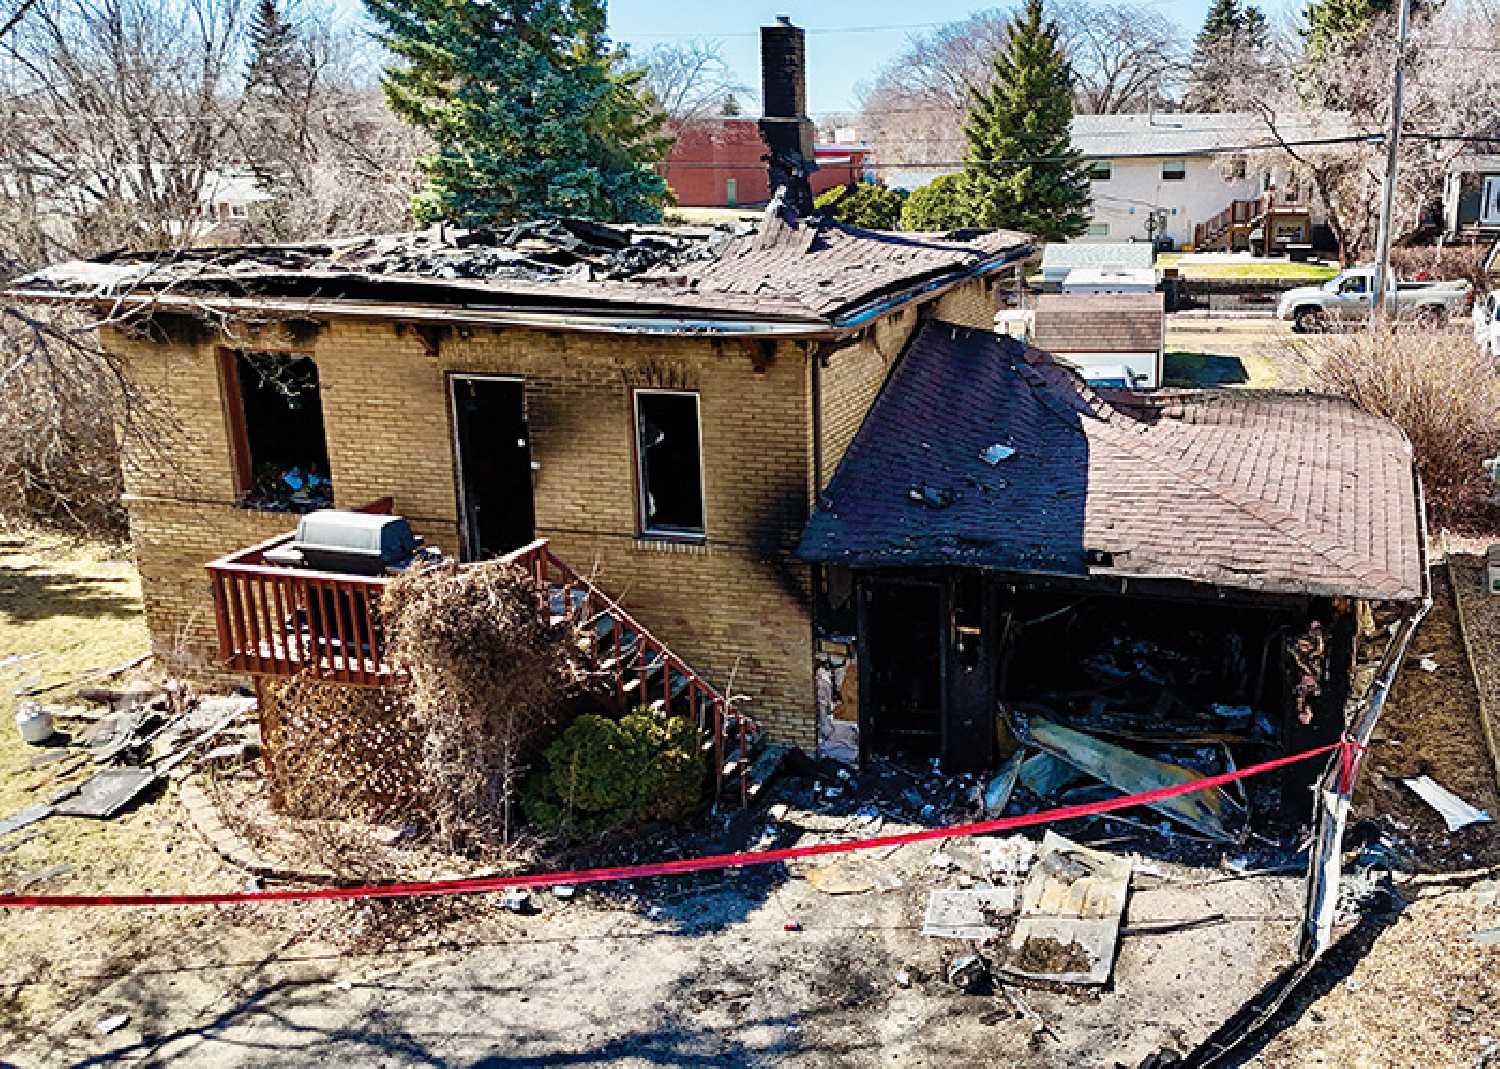 The home of Sam Burroughs was destroyed by fire on the night of Friday, April 19. Sam says he has seen outstanding support from the community since the blaze.